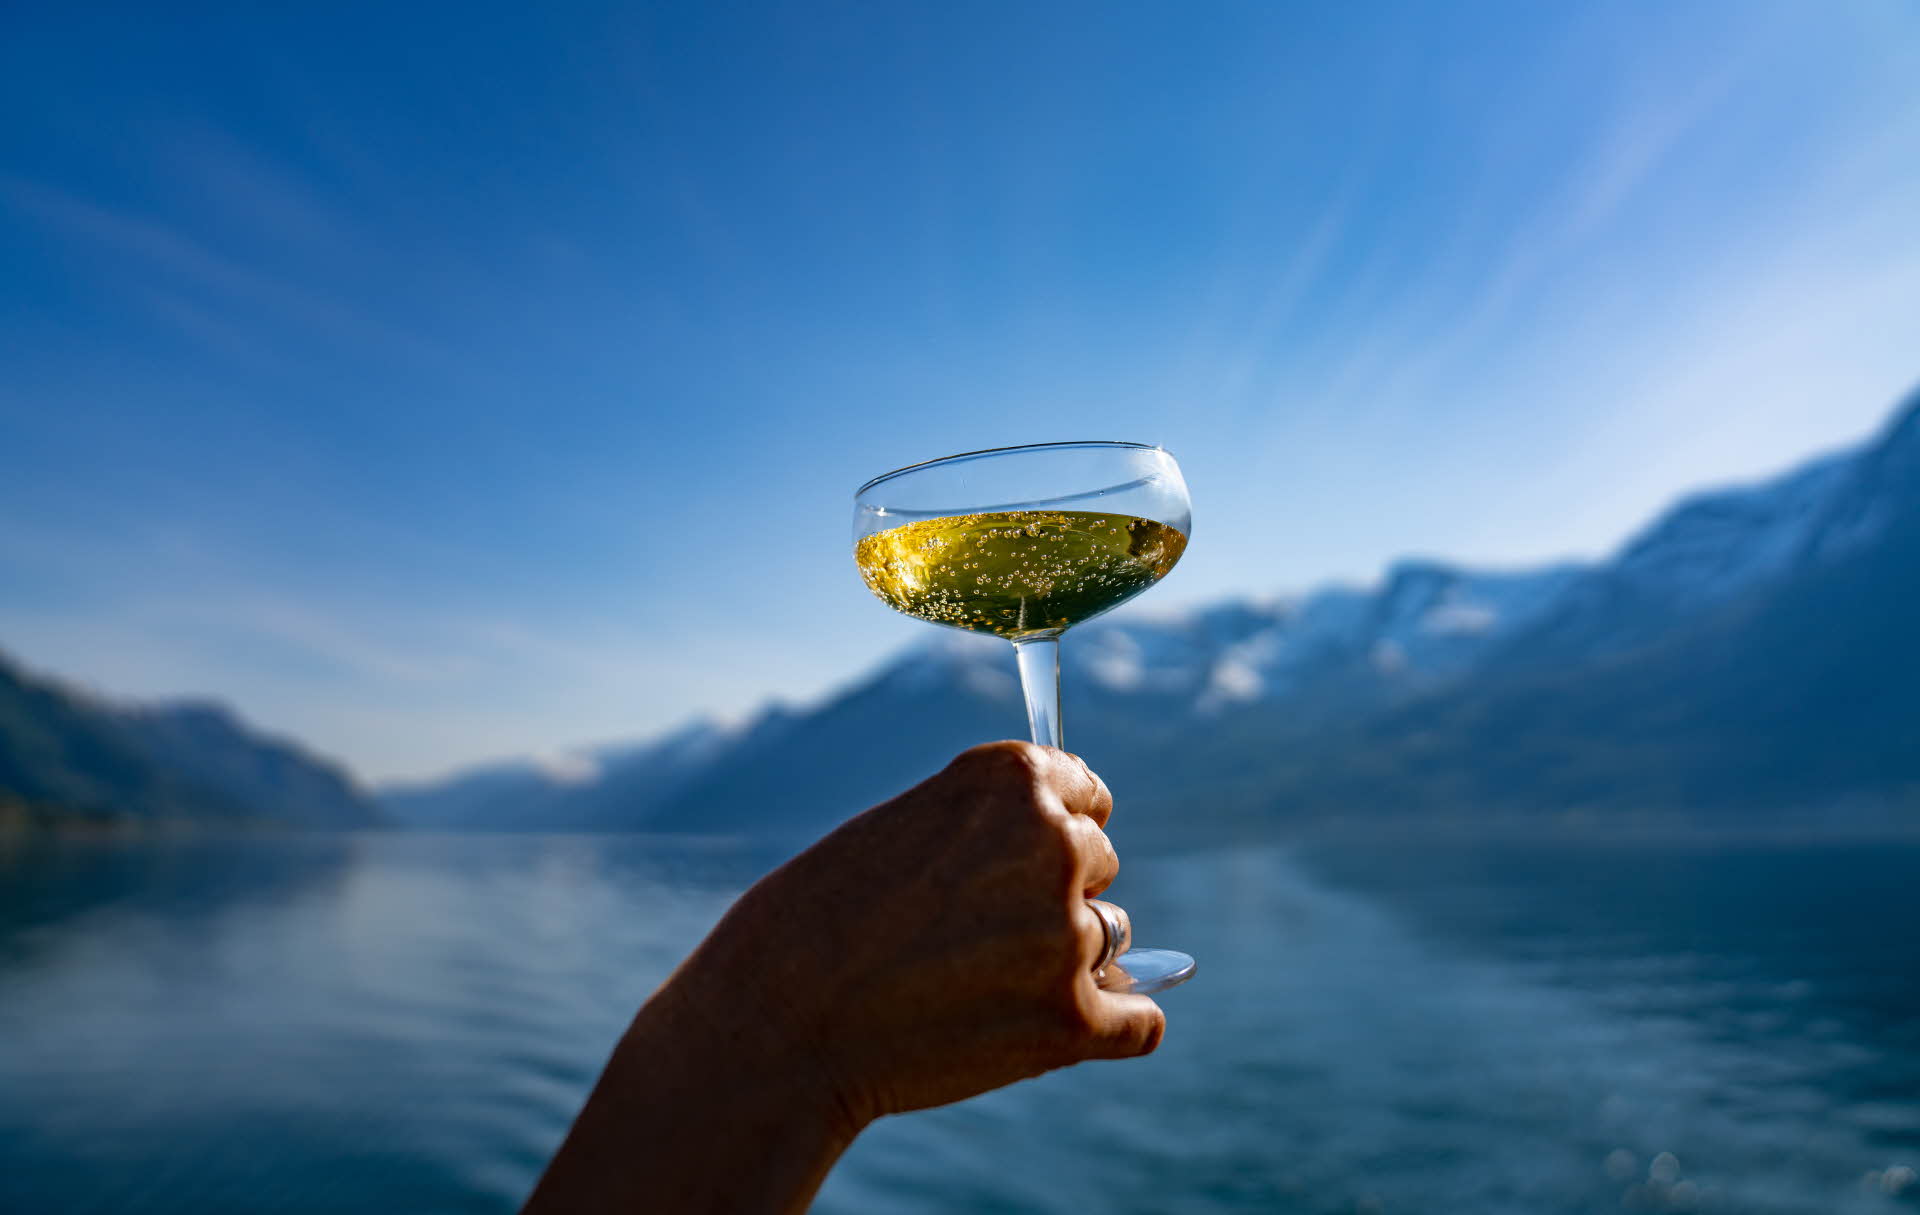 A hand holding a glass of cider with the Hardangerfjord and mountains in the background